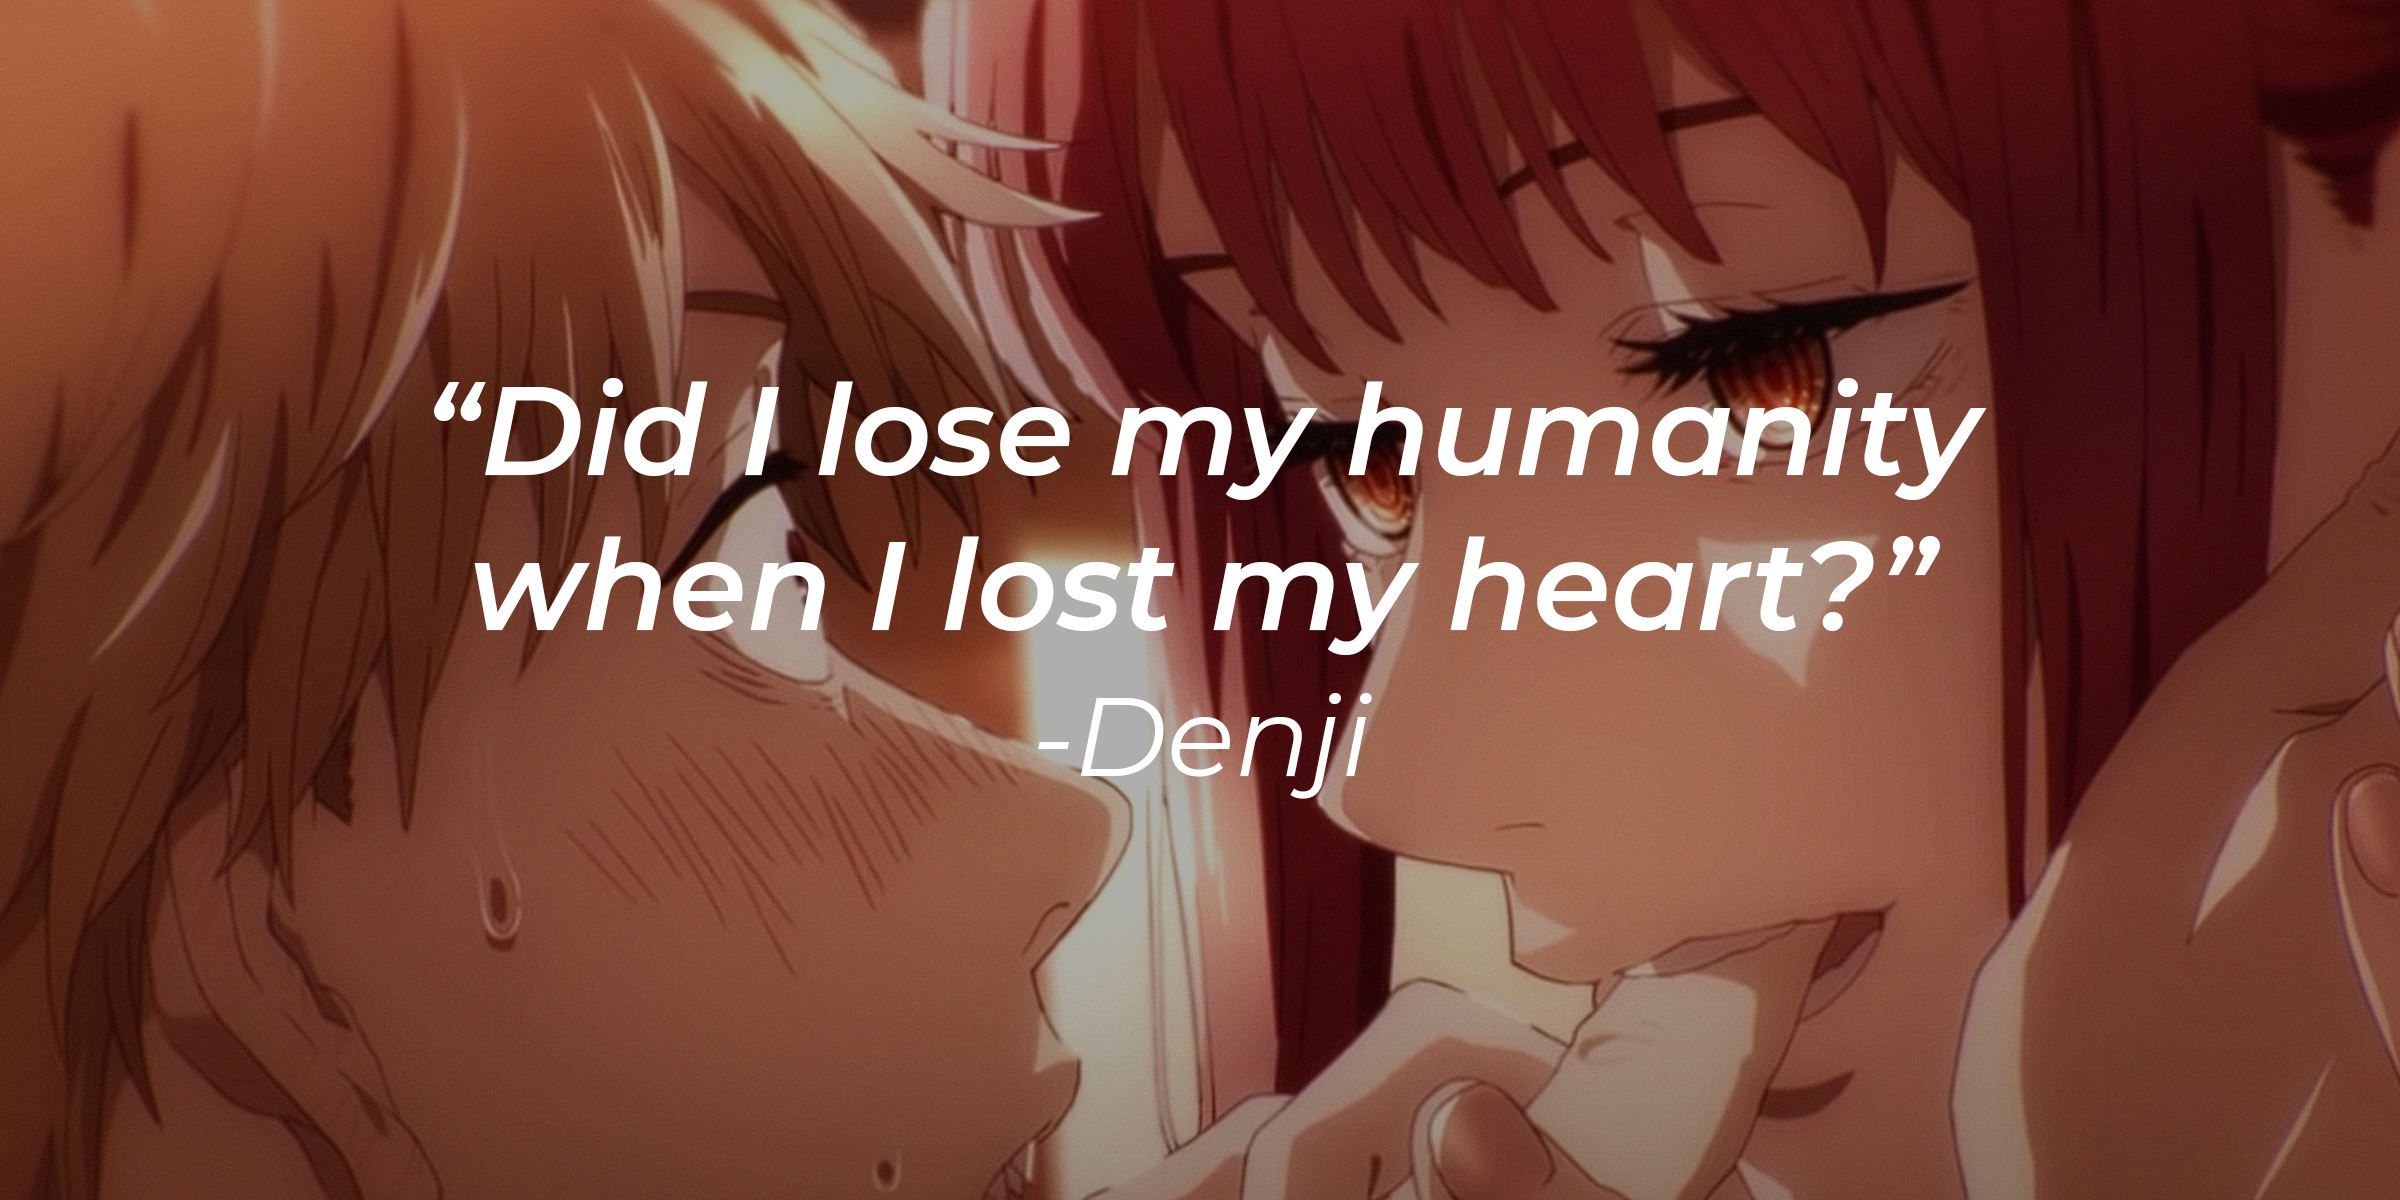 An image of Denji and Maxima with a quote by Denji: “Did I lose my humanity when I lost my heart?” | Source: youtube.com/CrunchyrollCollection